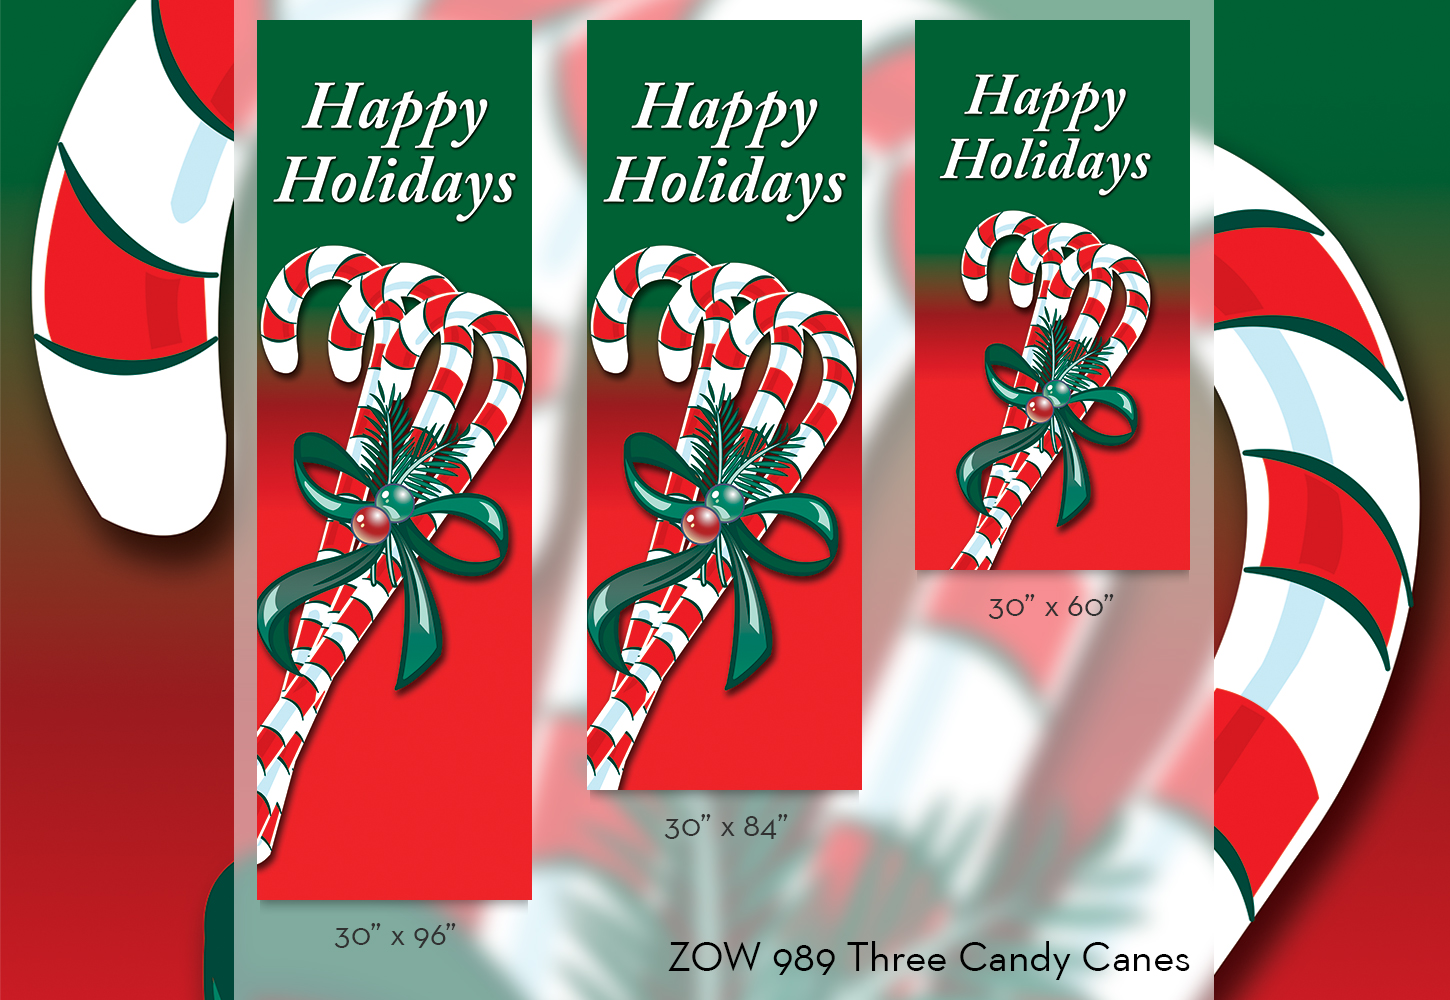 ZOW 989 Three Candy Canes